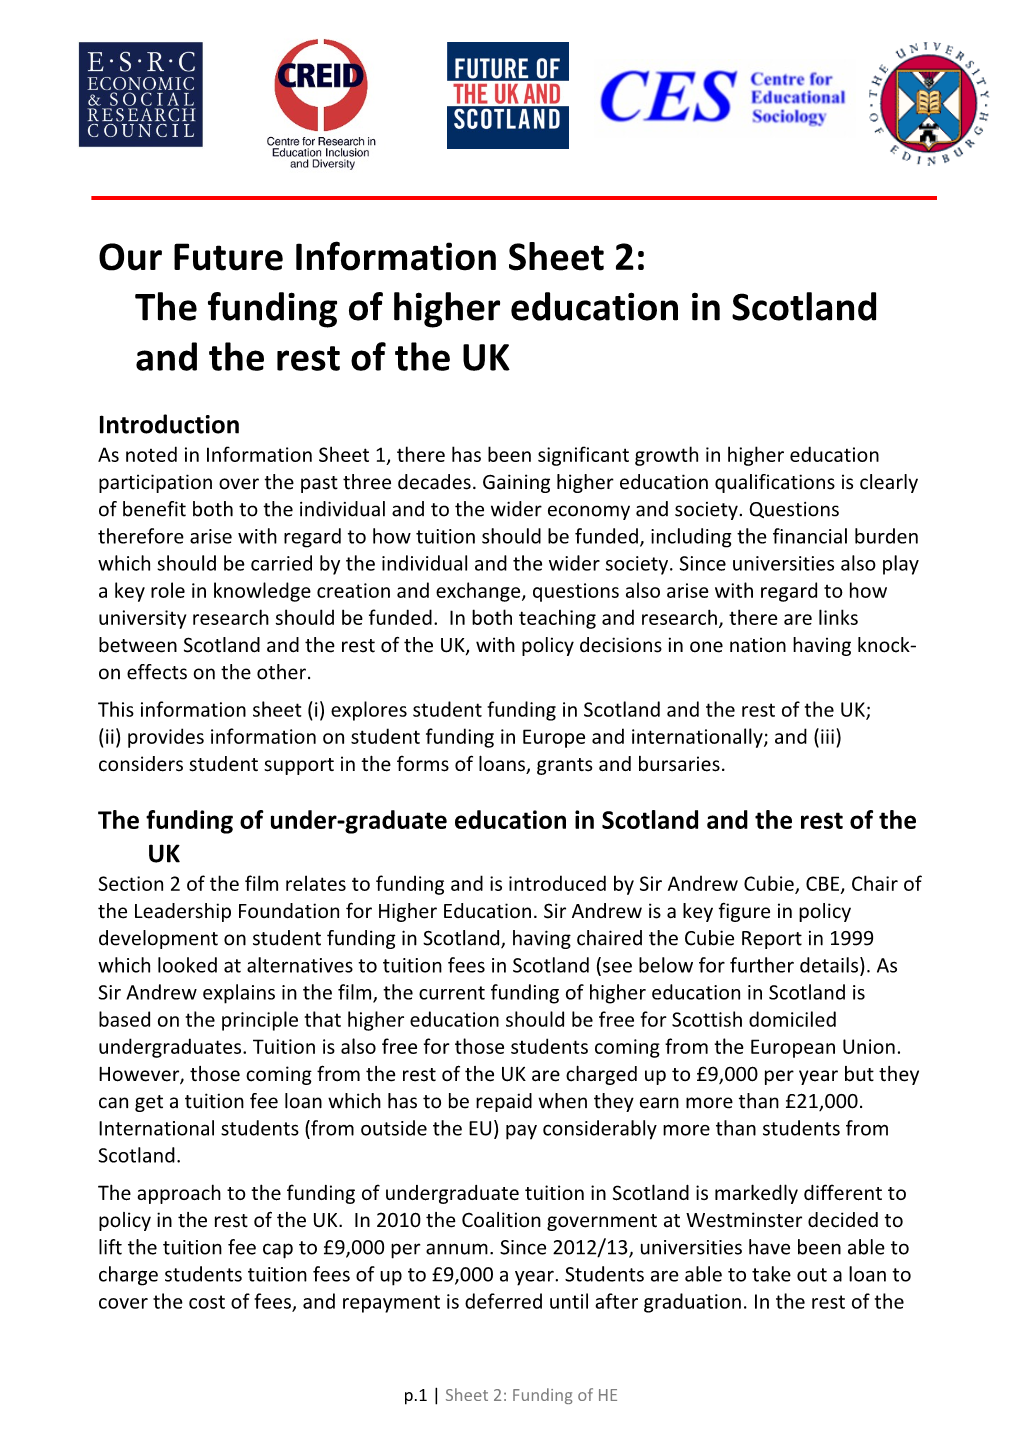 Our Future Information Sheet 2:The Funding of Higher Education in Scotland and the Rest